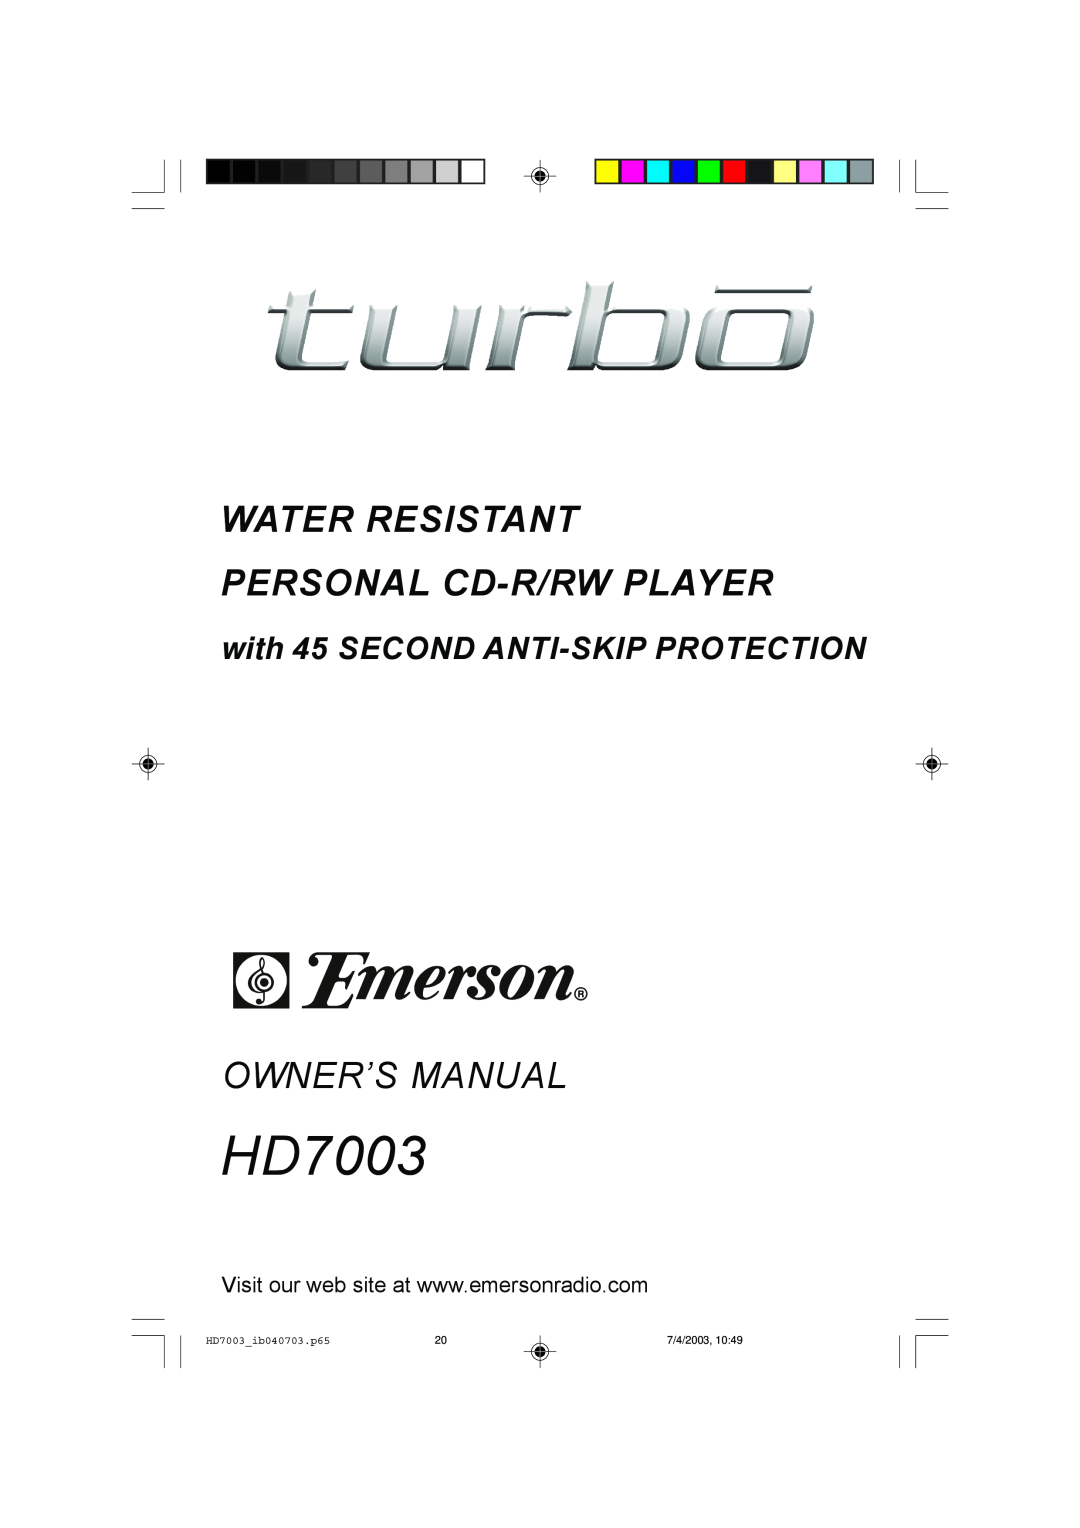 Emerson HD7003 owner manual Water Resistant Personal Cd-R/Rw Player, Owner’S Manual, with 45 SECOND ANTI-SKIP PROTECTION 